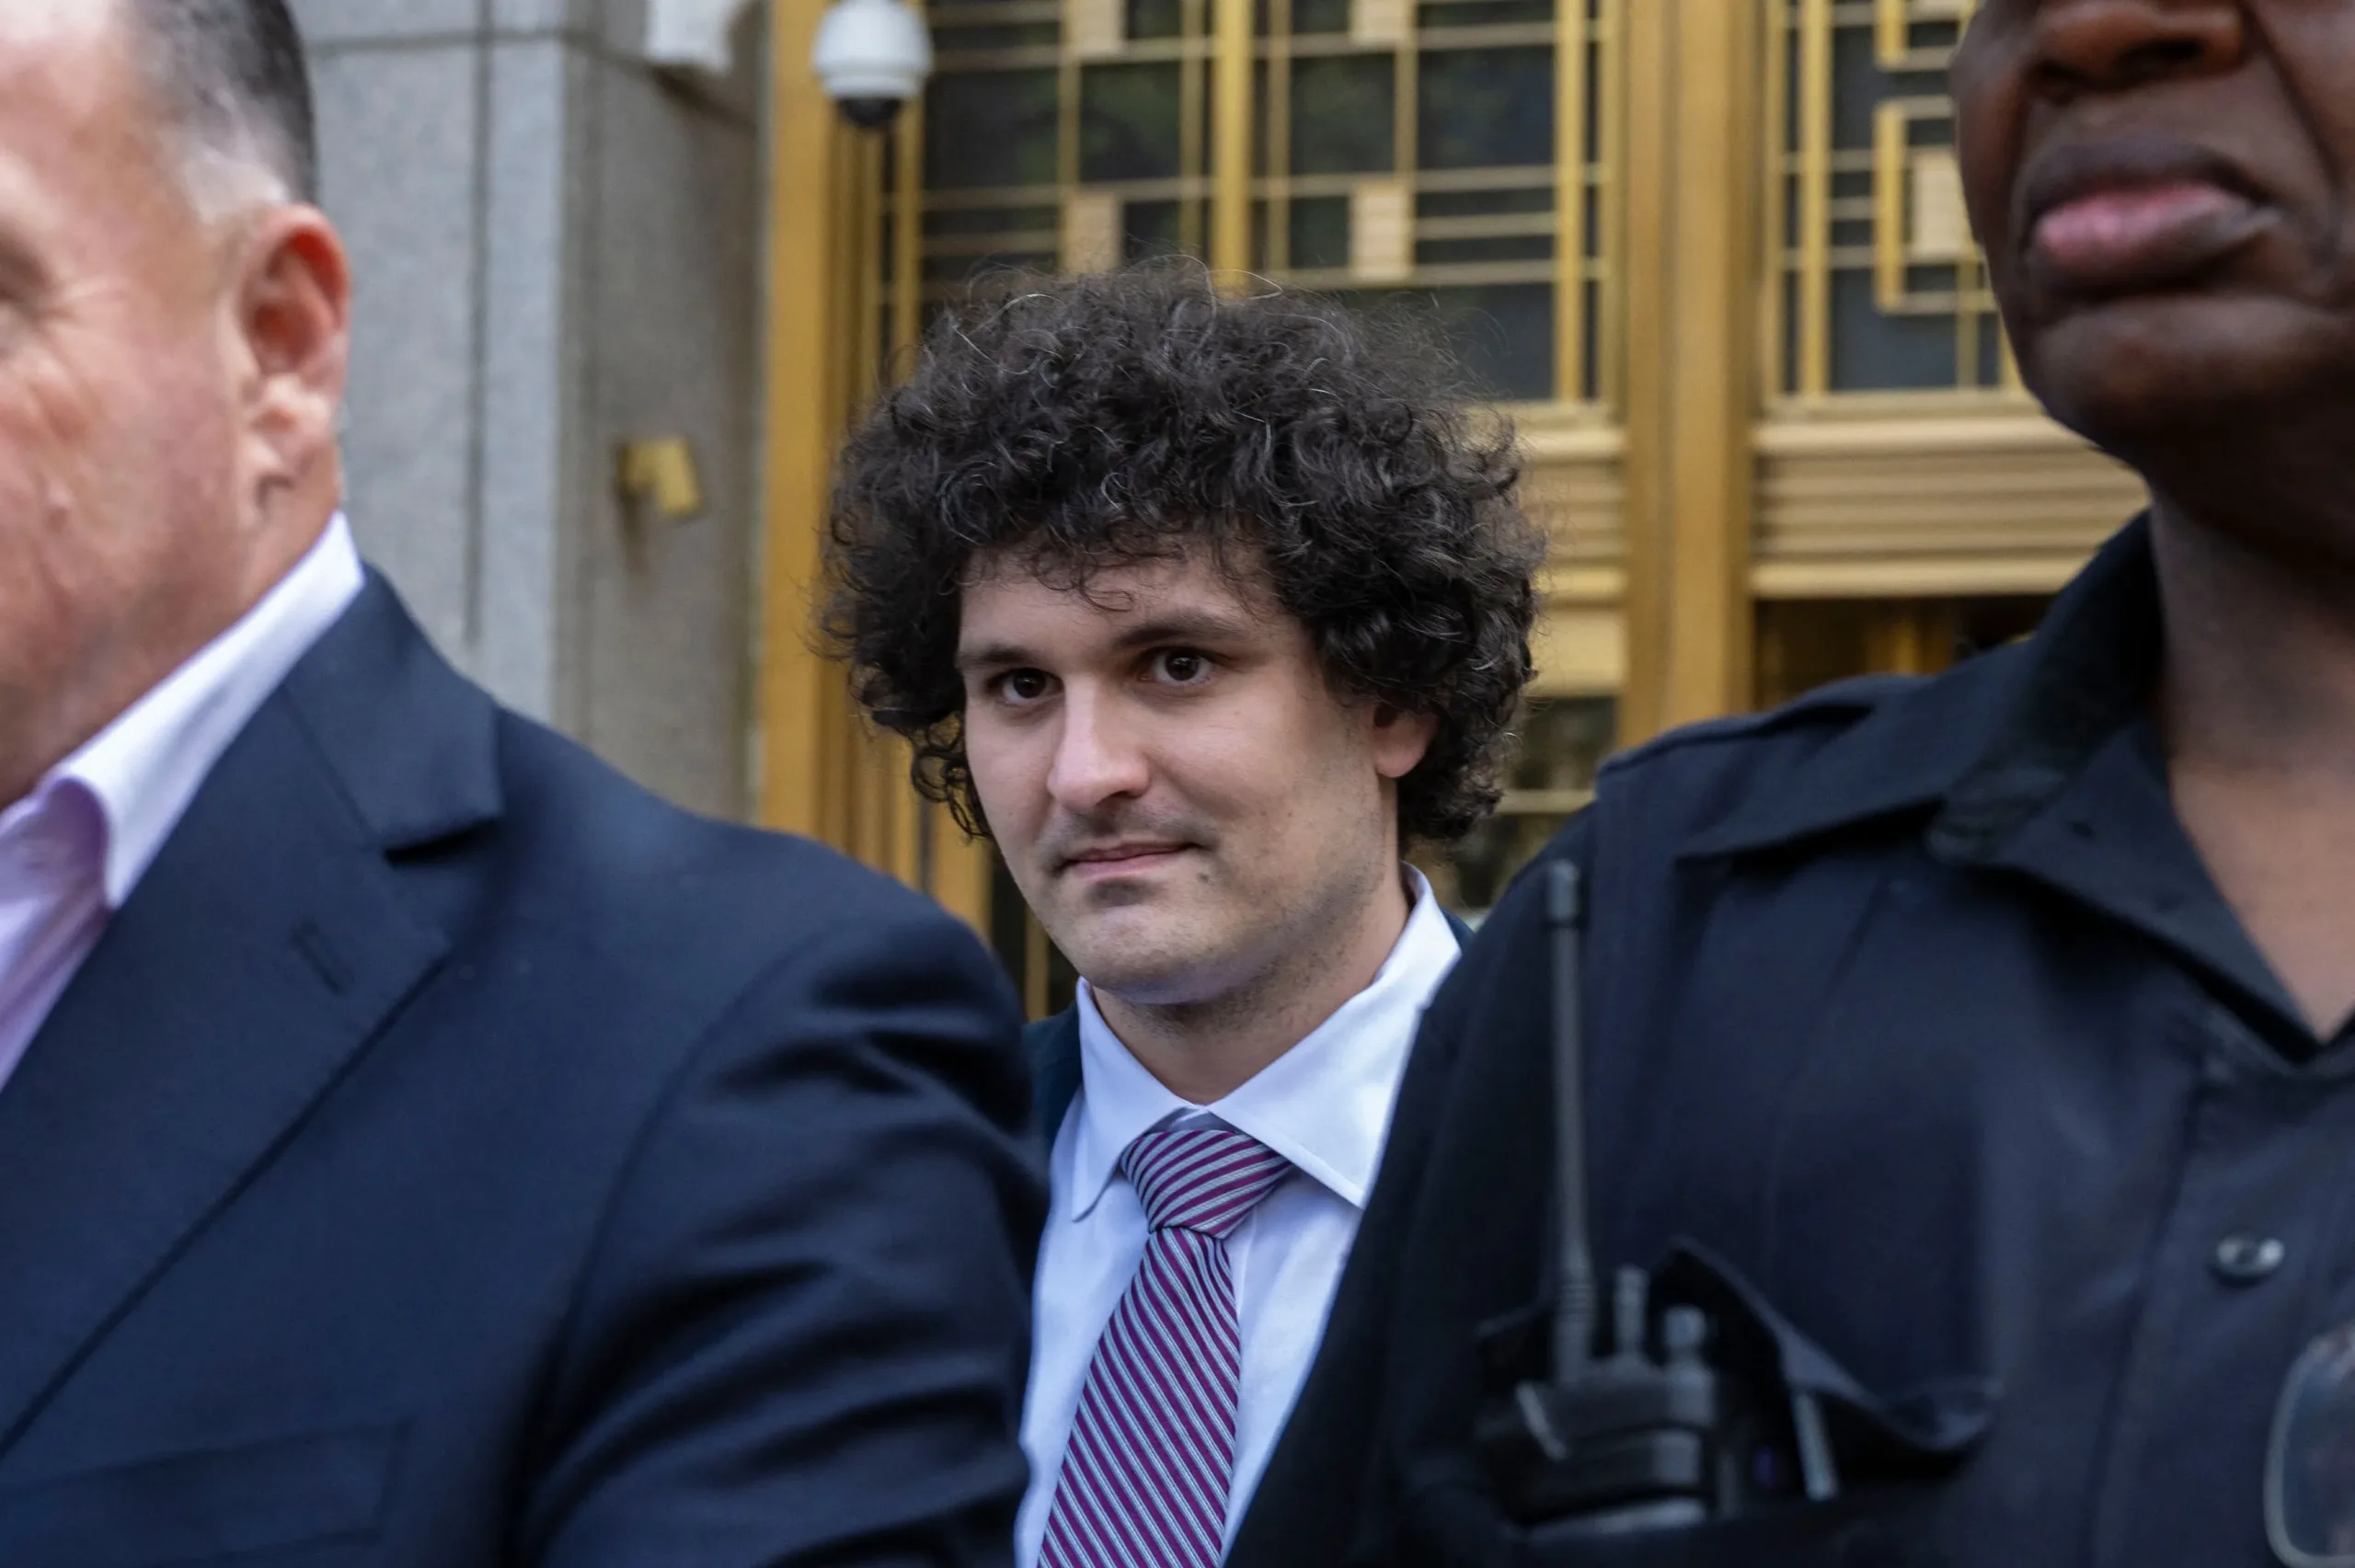 'Crypto King' Sam Bankman-Fried faces decades in prison after conviction.